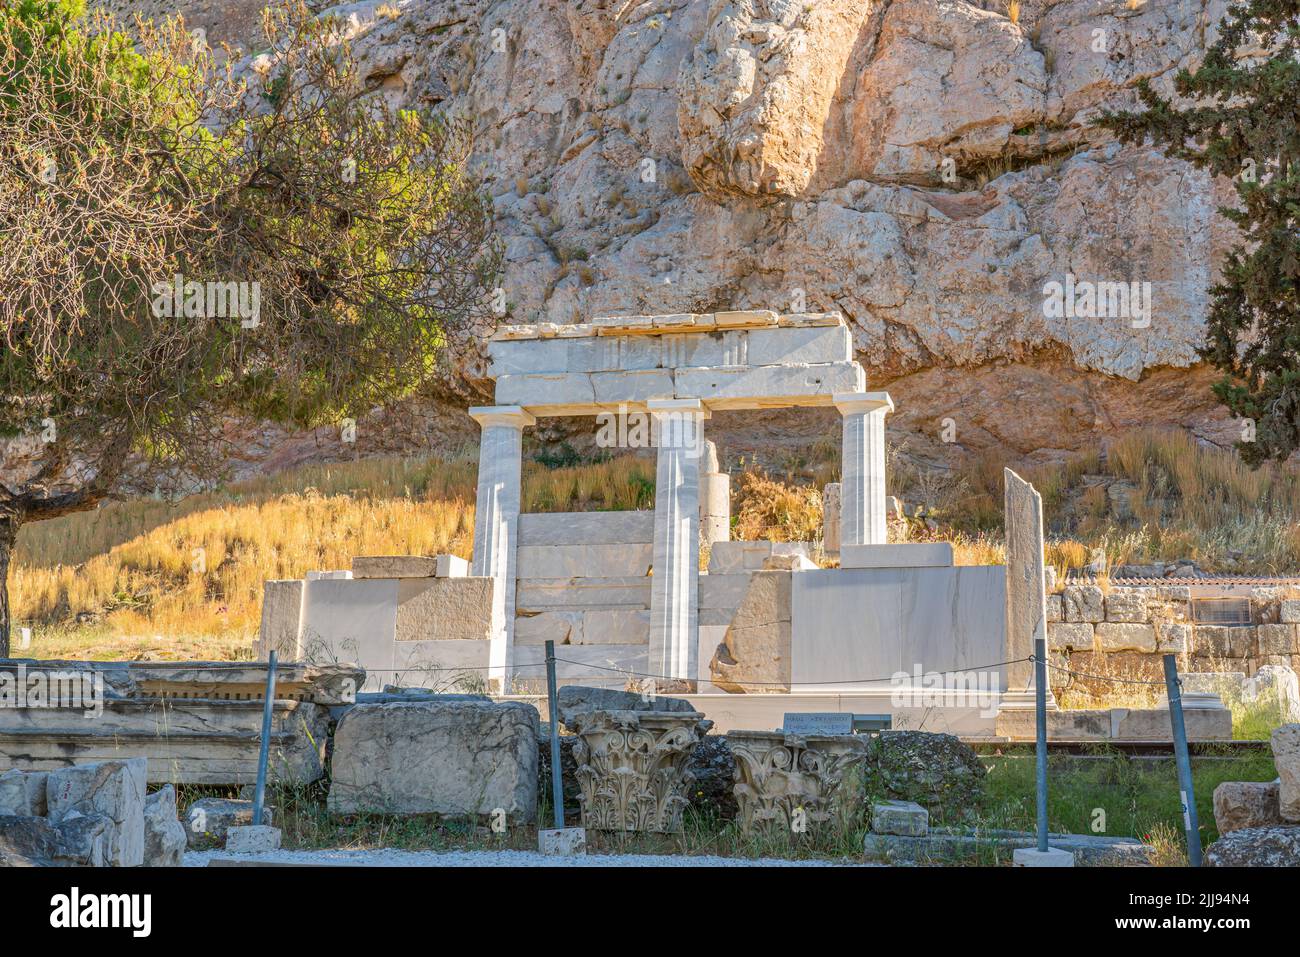 Asklepieion, the sanctuary of the healing god Asklepios on the western side of the Acropolis Hill in Athens, Greece Stock Photo